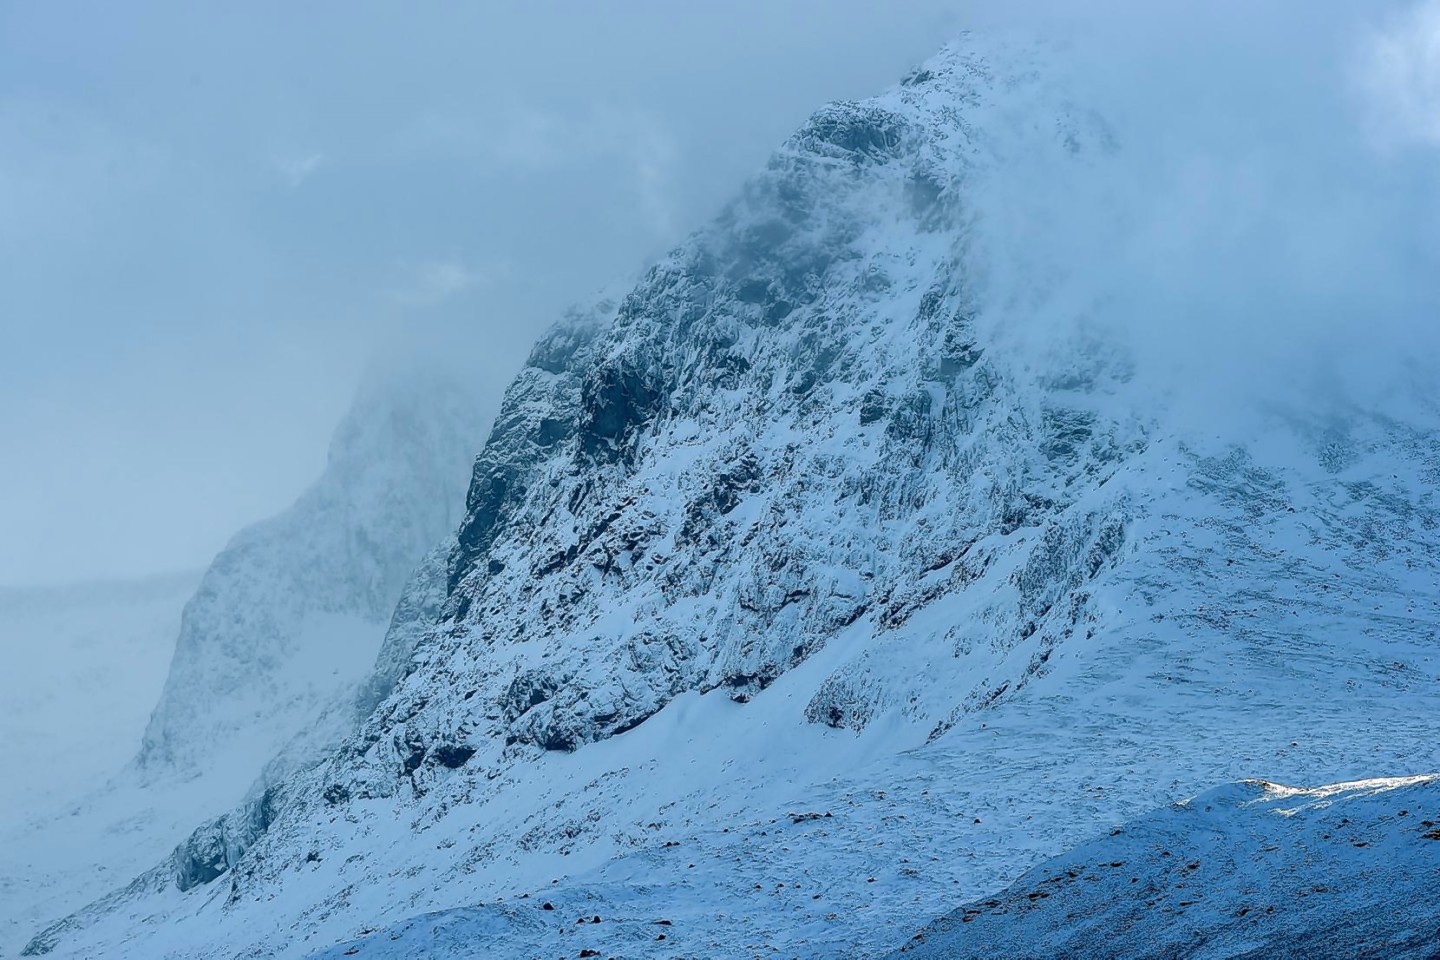 Snow on the north face of Ben Nevis